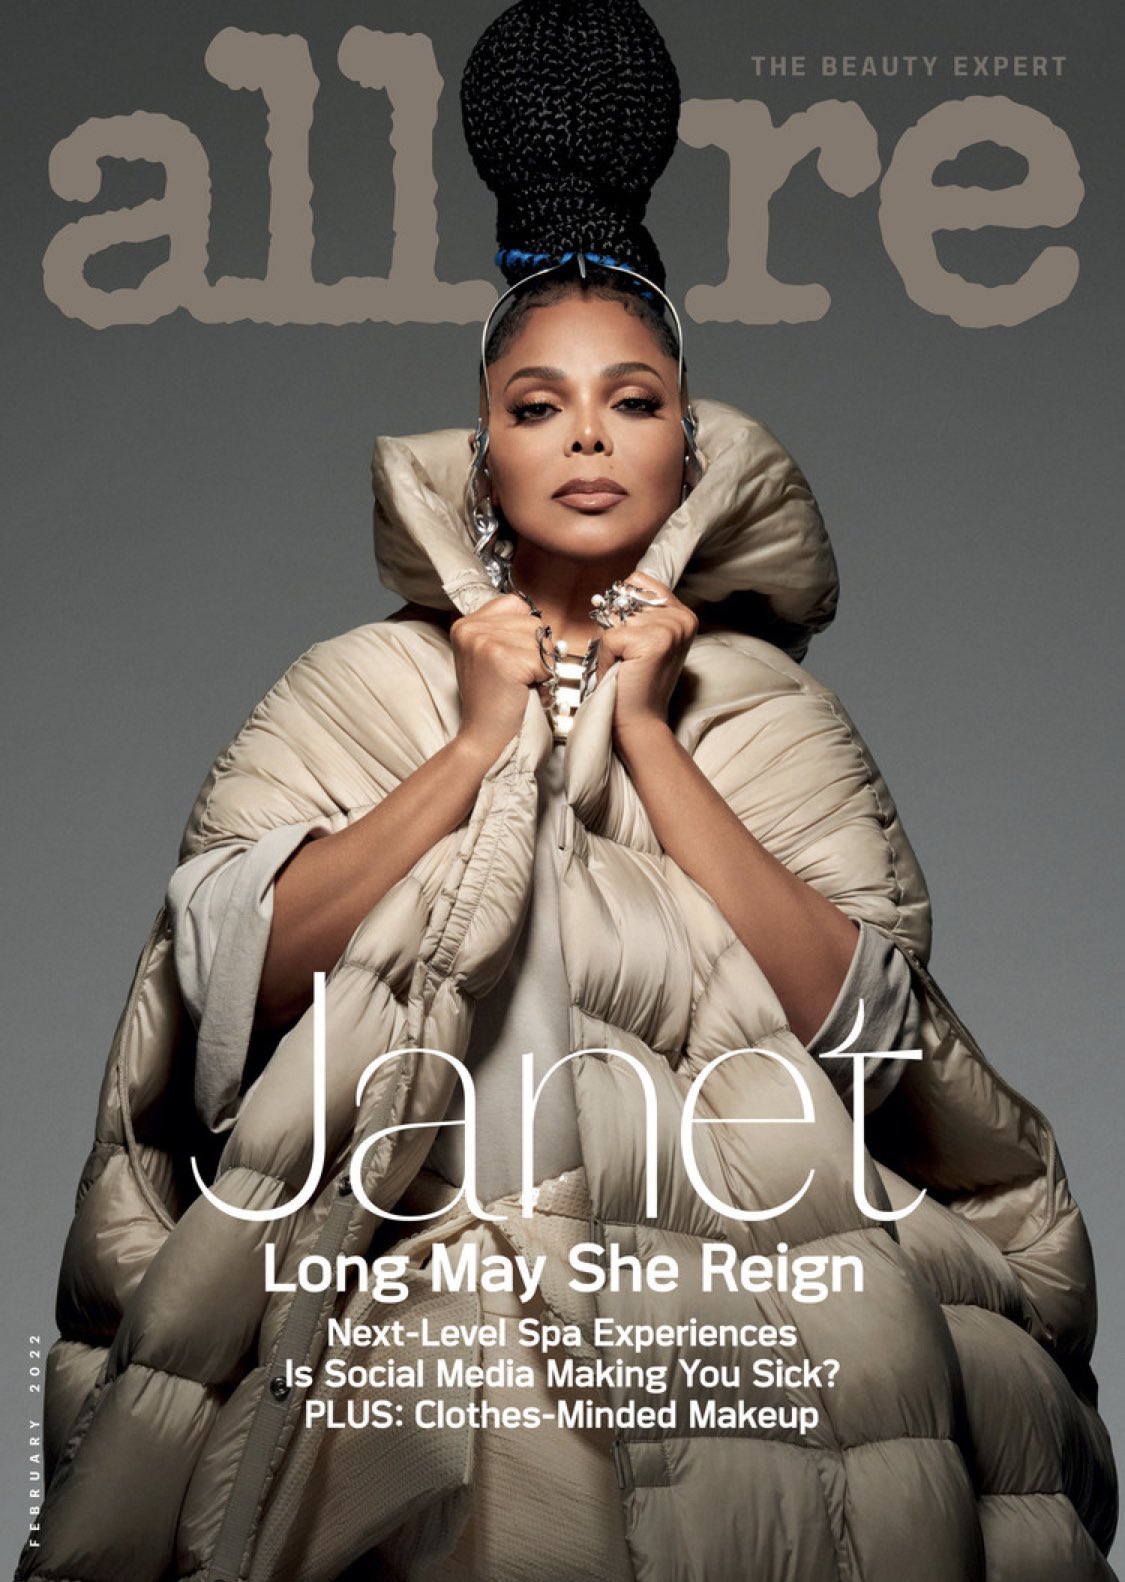 Janet Jackson shares her thoughts on body positivity,  and her  evolving style